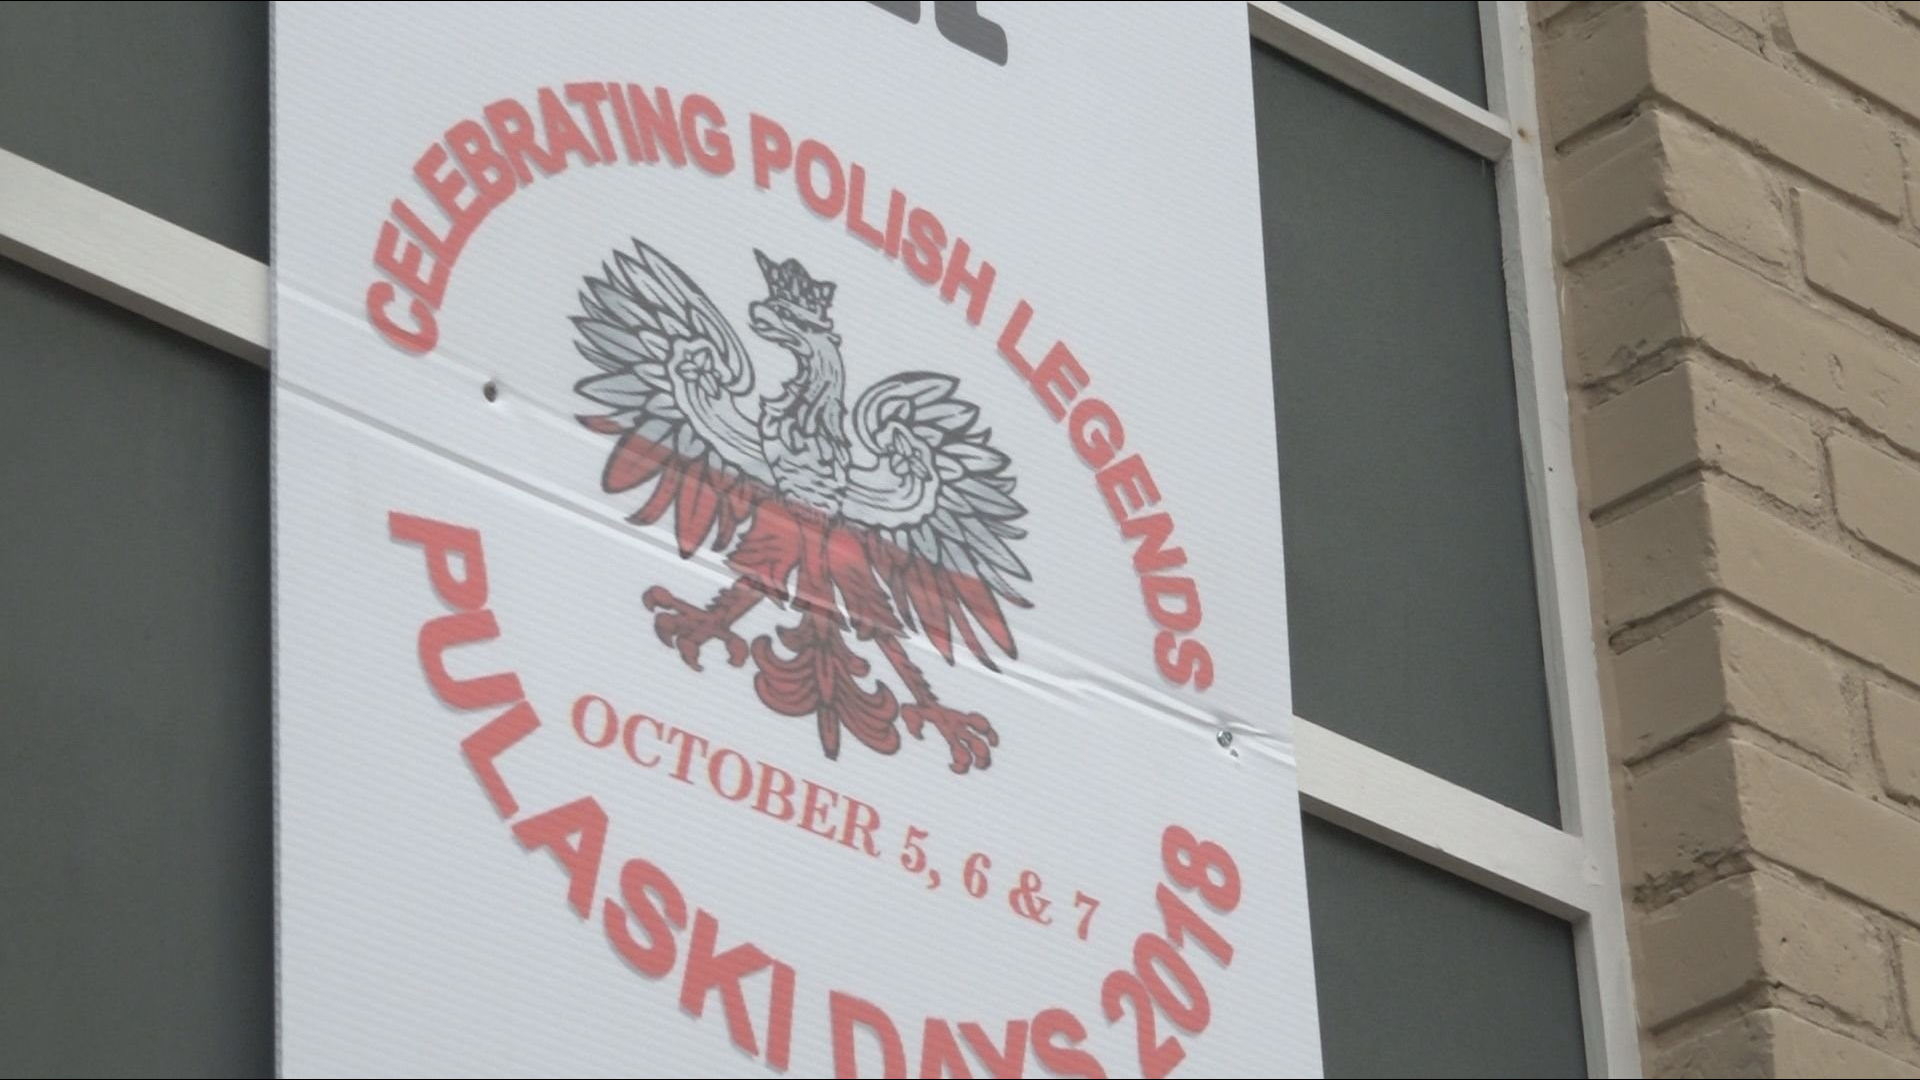 If you've haven't already, smoke some kielbasa and roll your golumpki -- Pulaski Days in Grand Rapids wraps up this weekend.